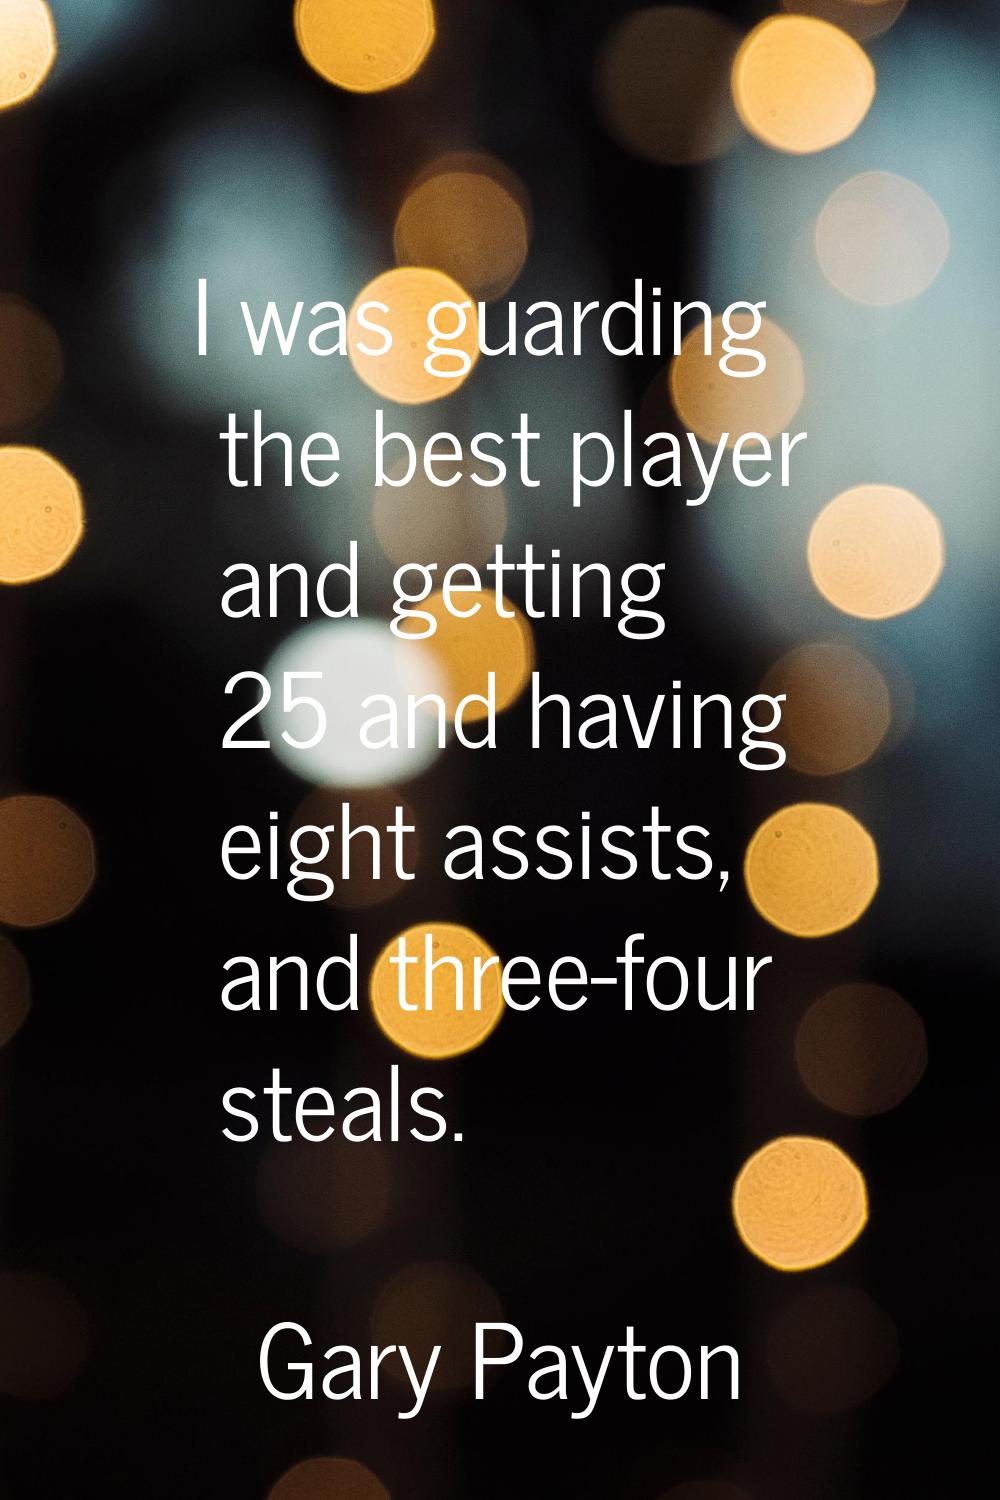 I was guarding the best player and getting 25 and having eight assists, and three-four steals.